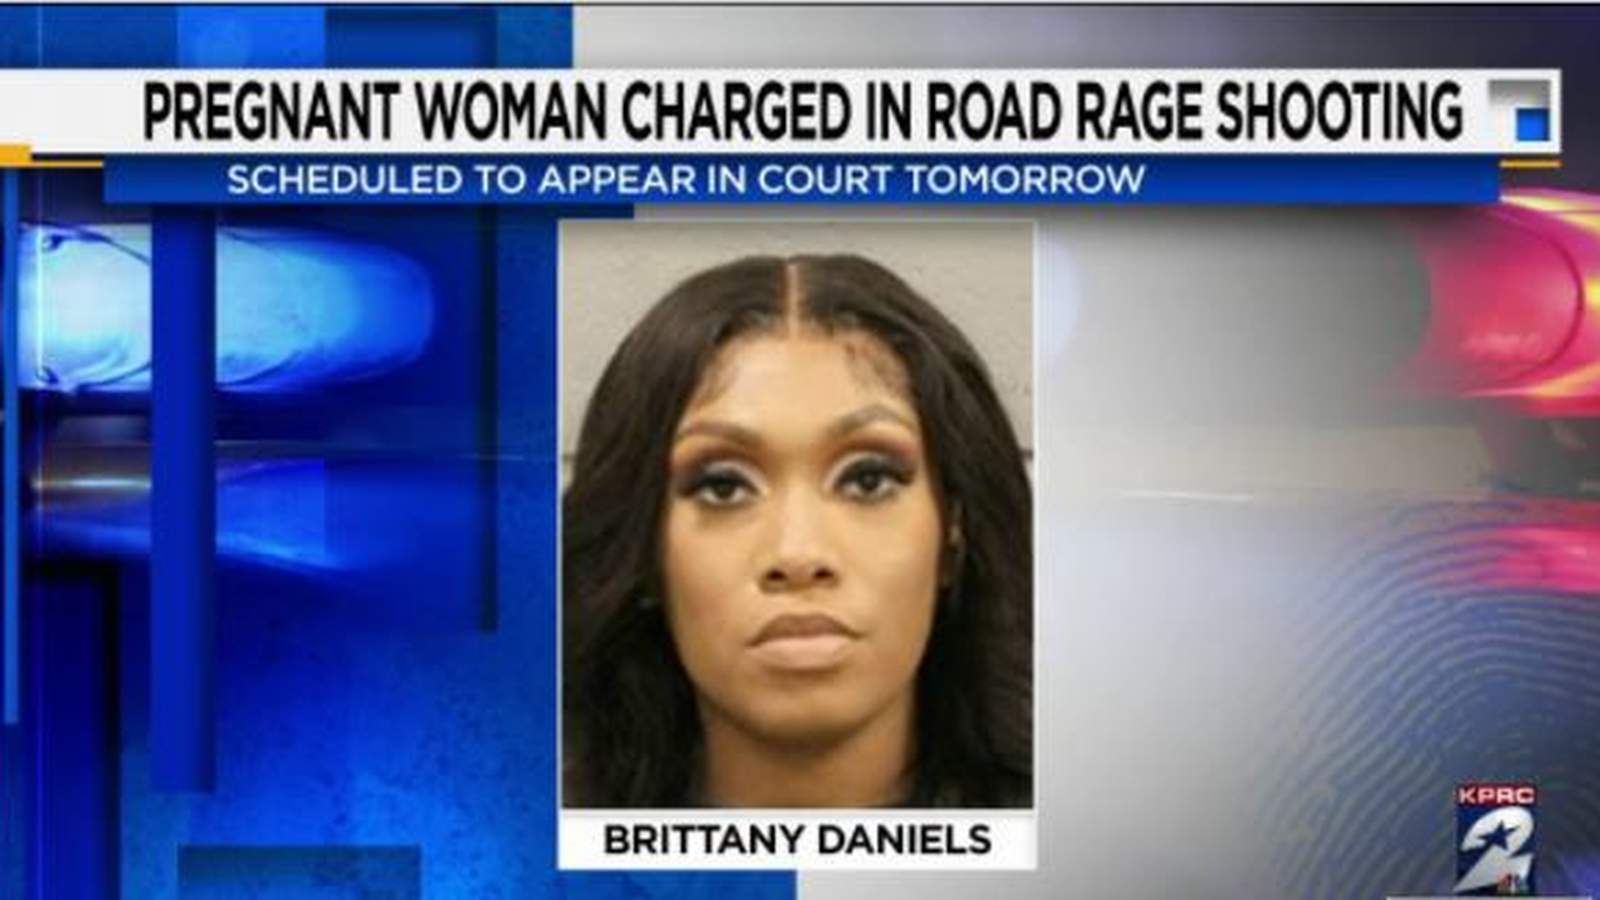 Pregnant woman accused in road rage shooting to appear in court Tuesday